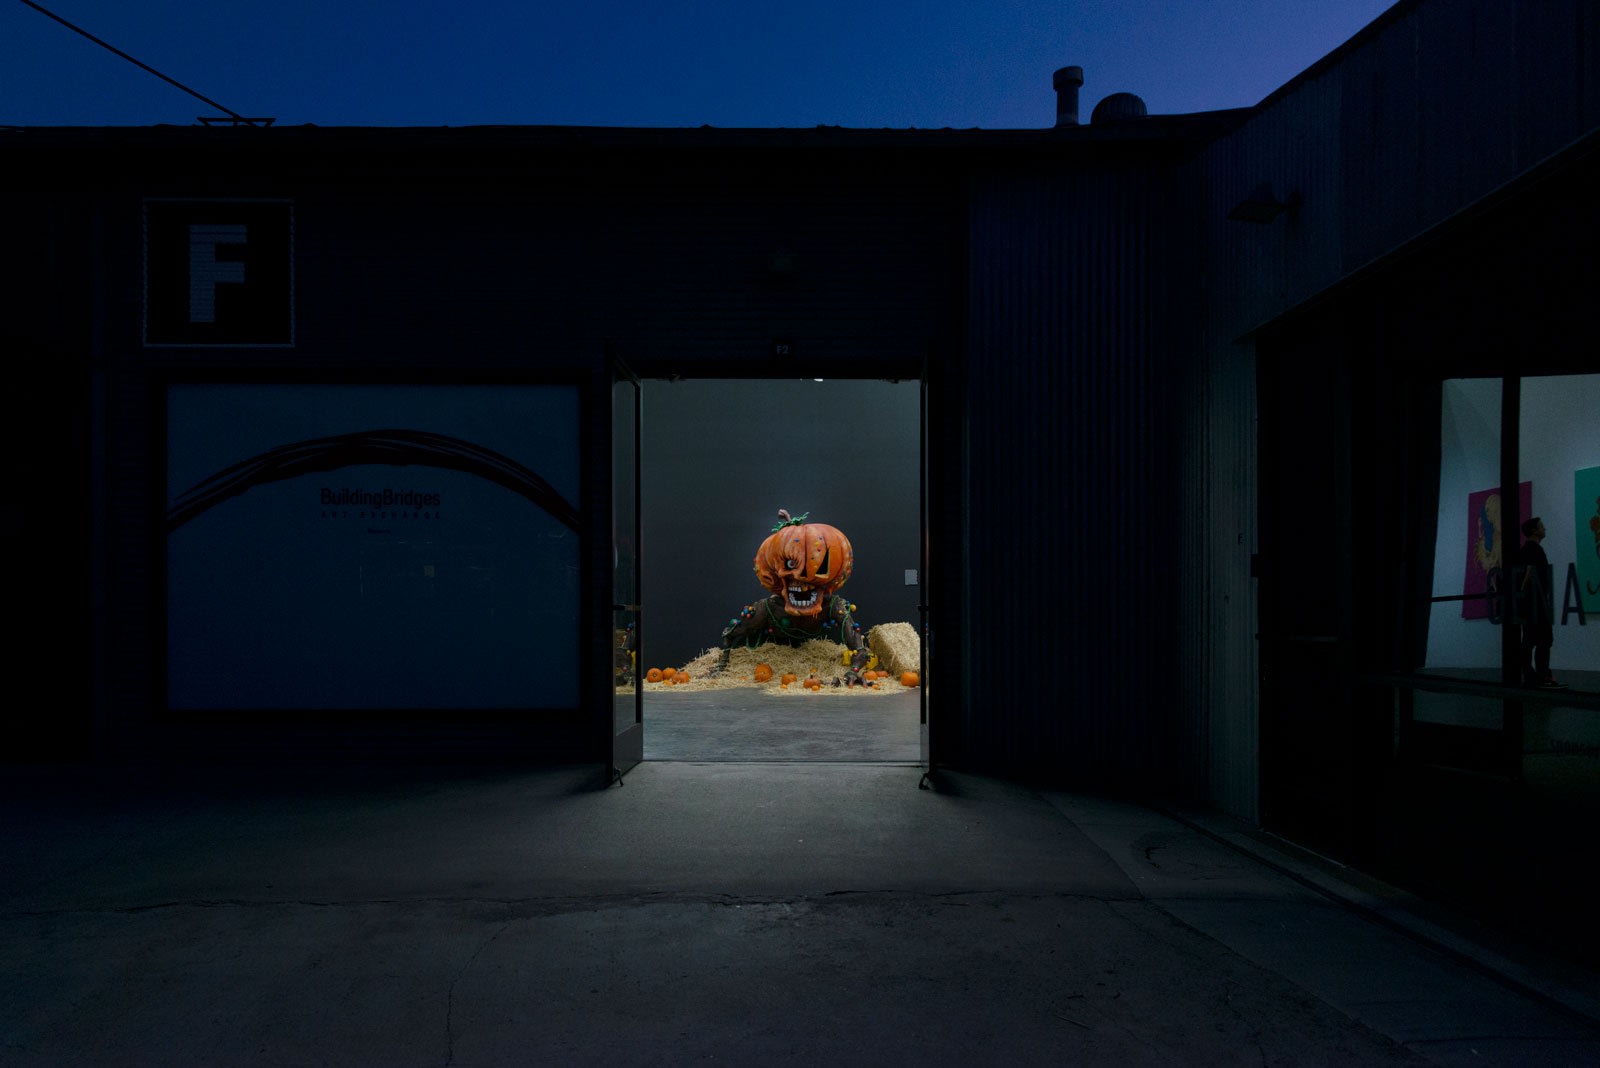 Outside photo looking into gallery with the Giant Pumpkin sculpture in focus